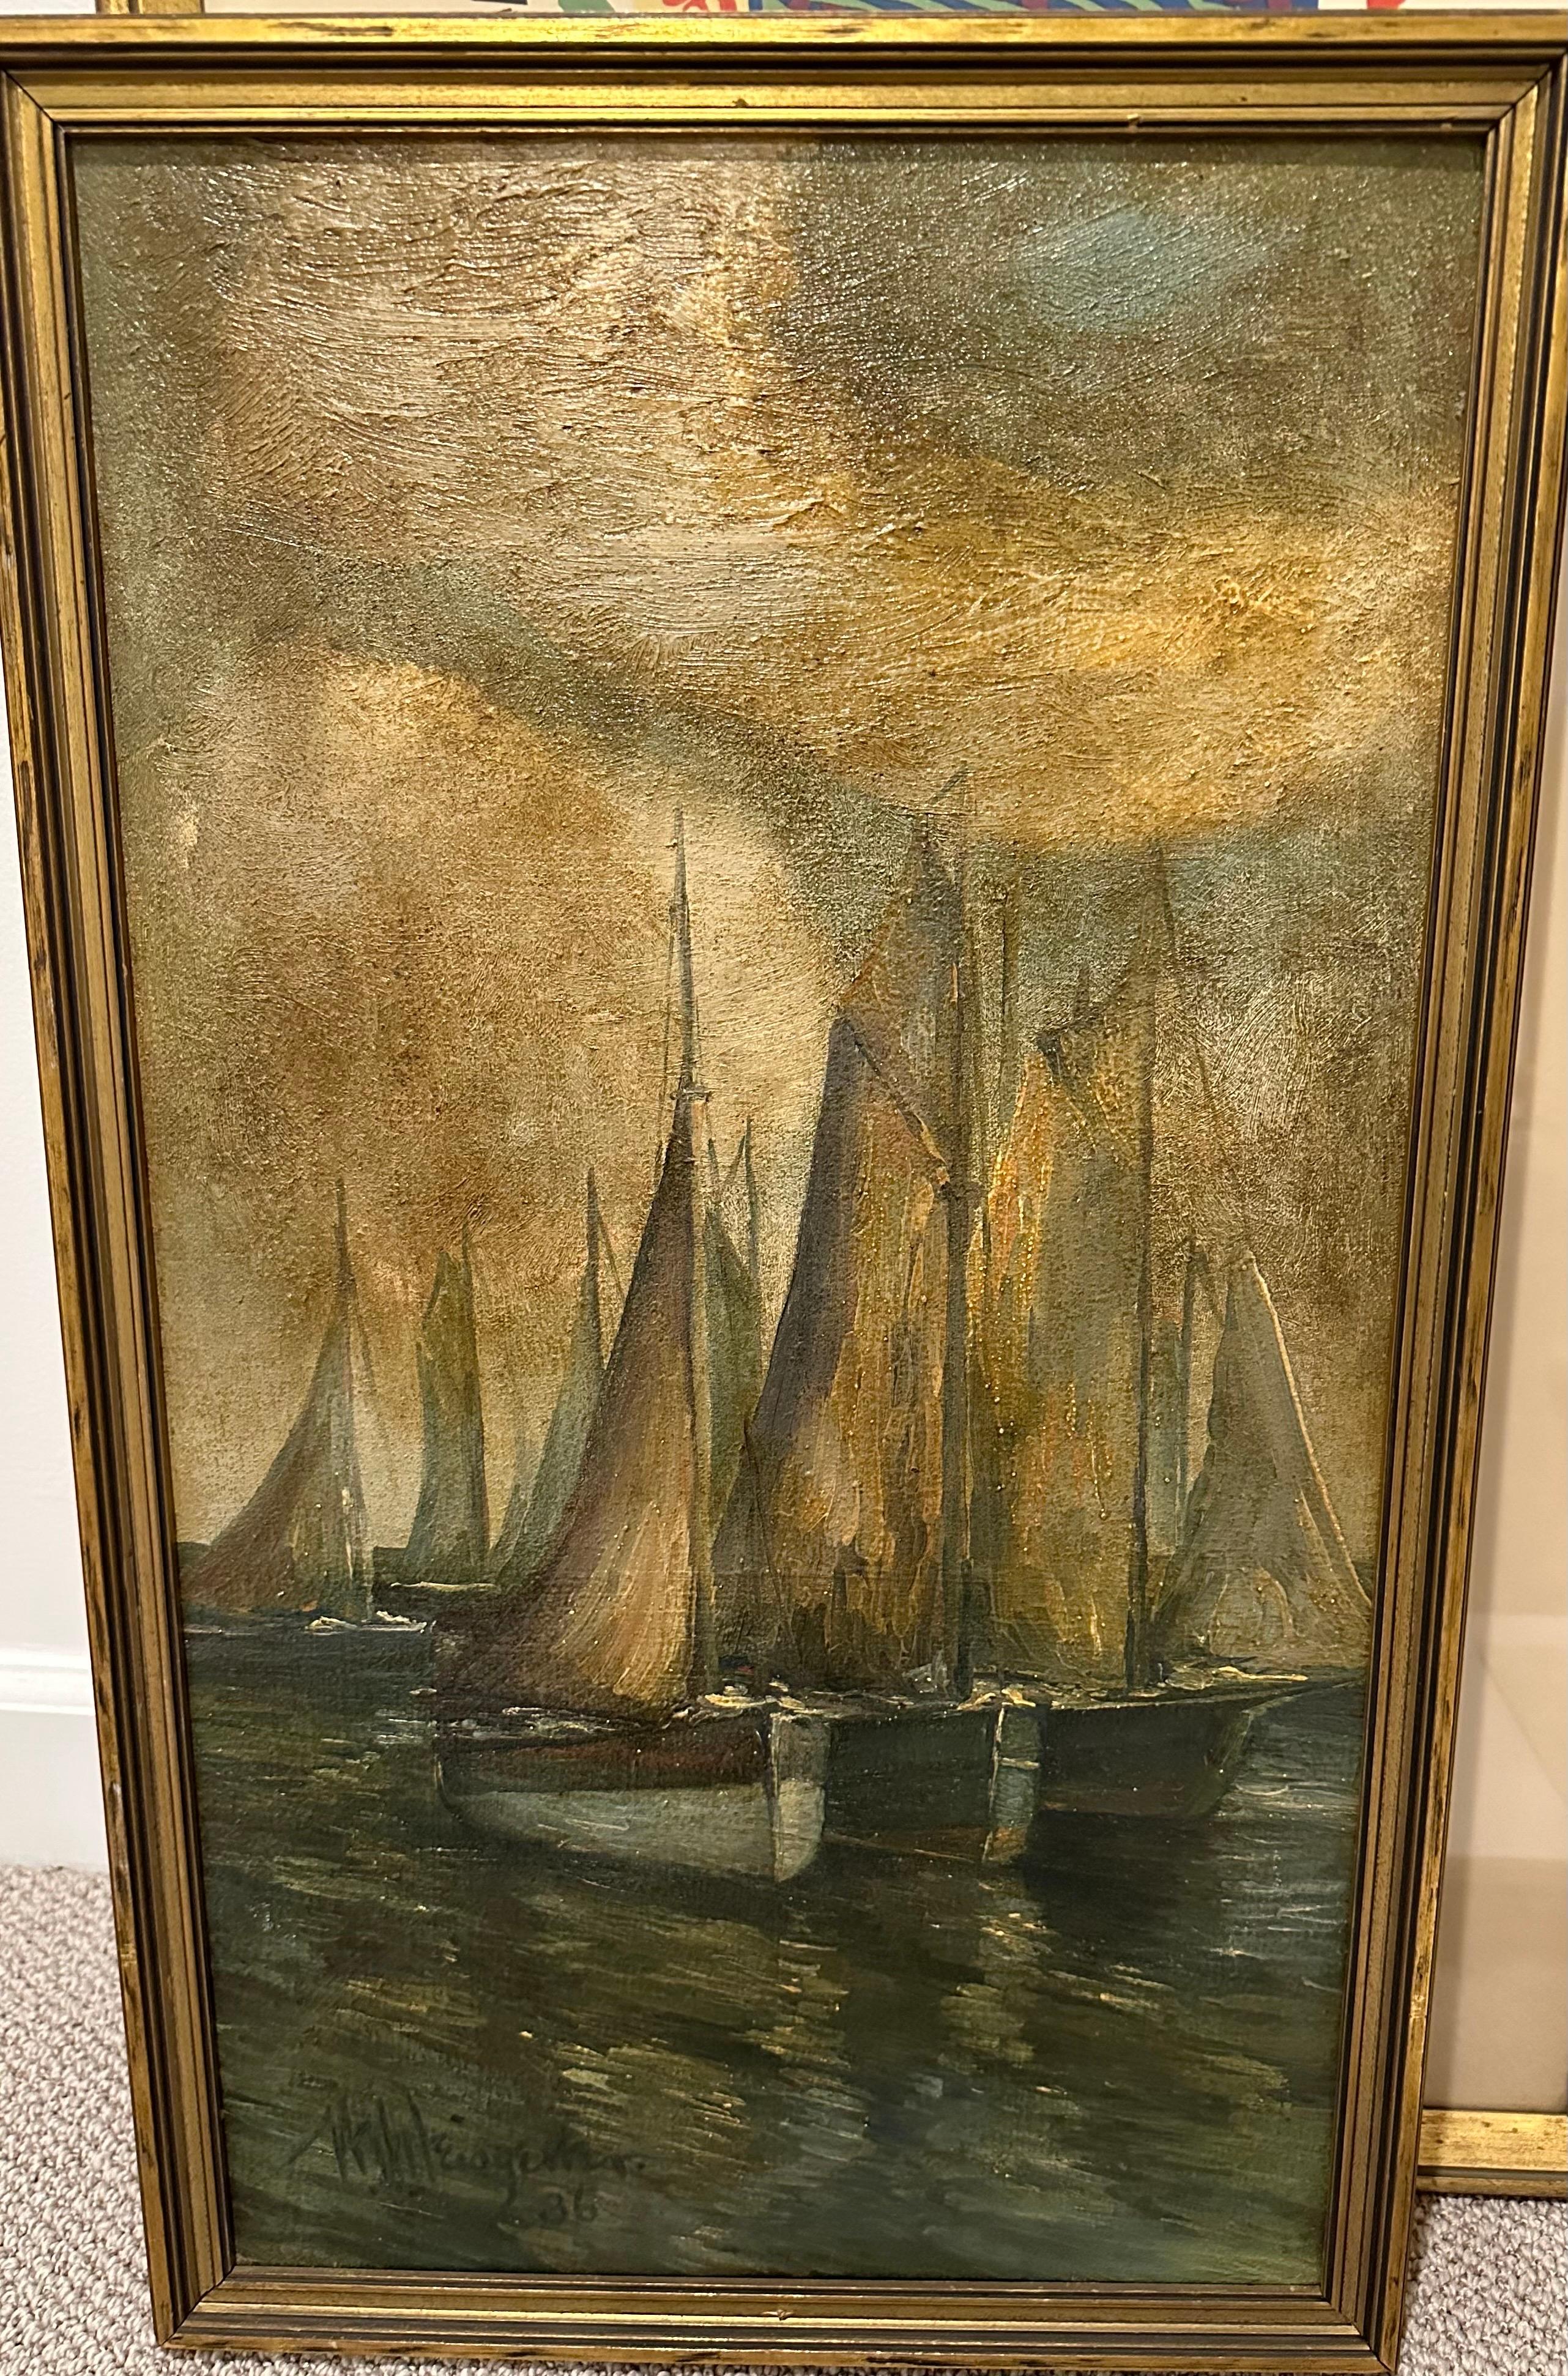 20th Century Mid-Century Sailboats on Water Signed Oil Painting, Vertical Framed Composition